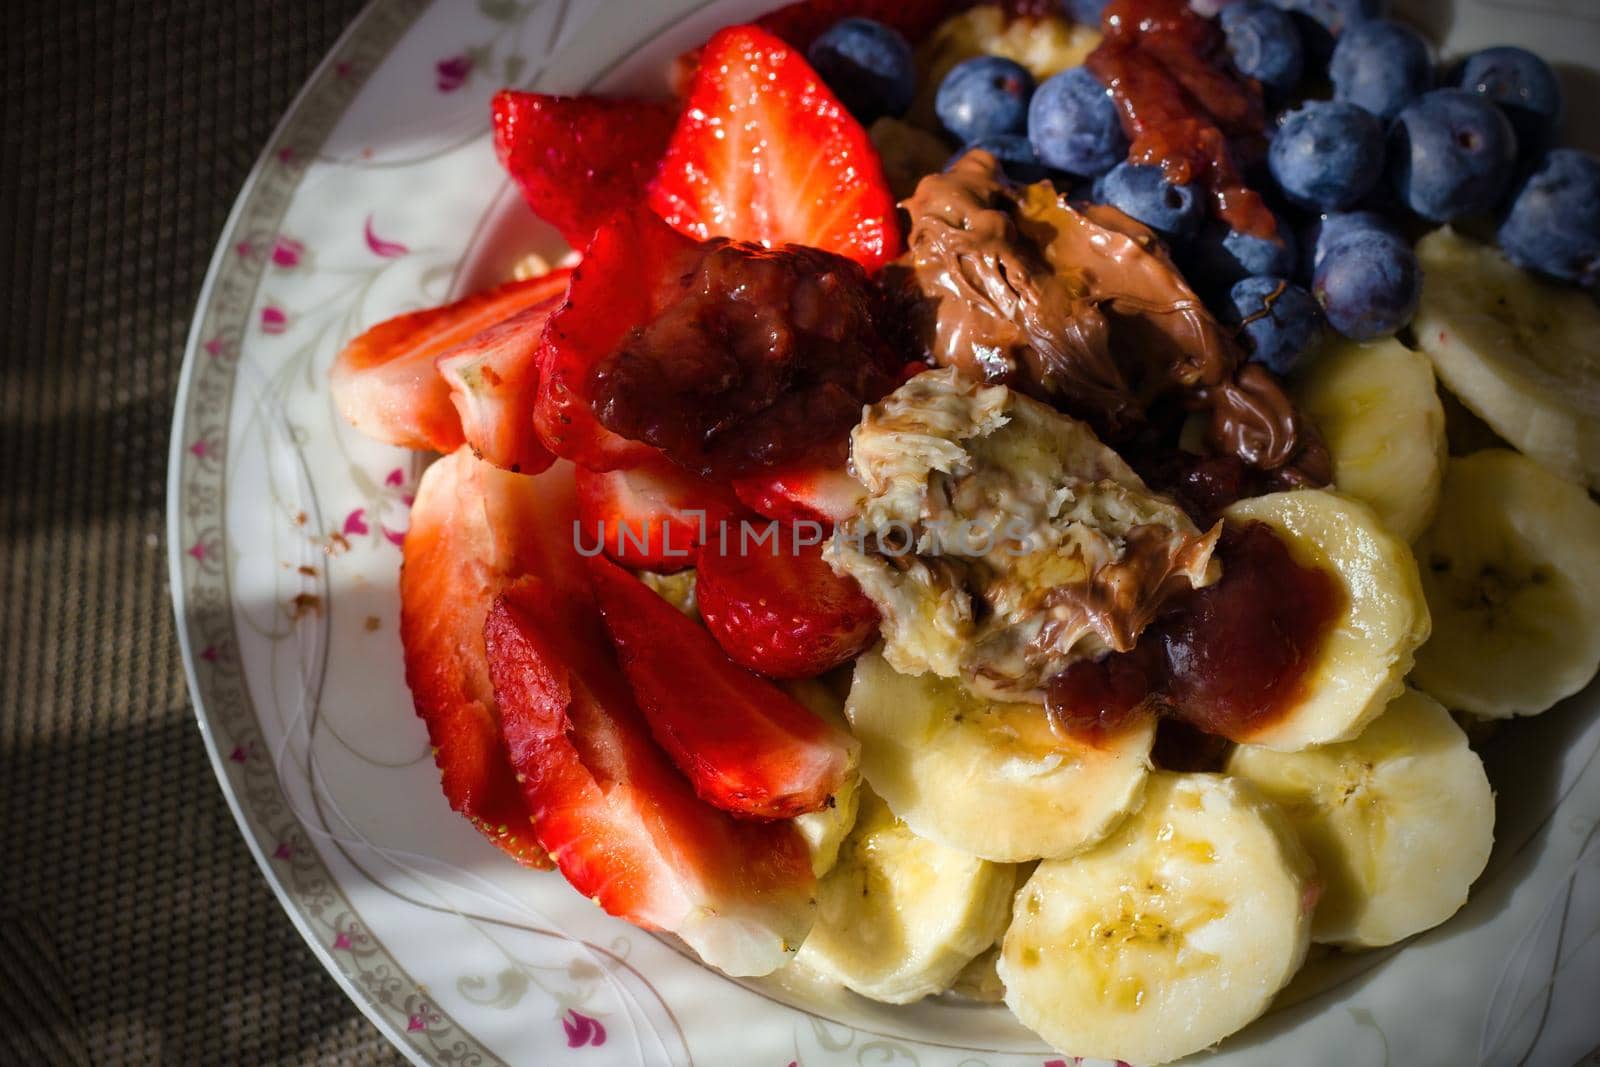 Close up shot of a healthy fruits such as banana, strawberries, blueberries on oats with milk with chocolate and hazelnut cream on top. Healthy morning breakfast concept